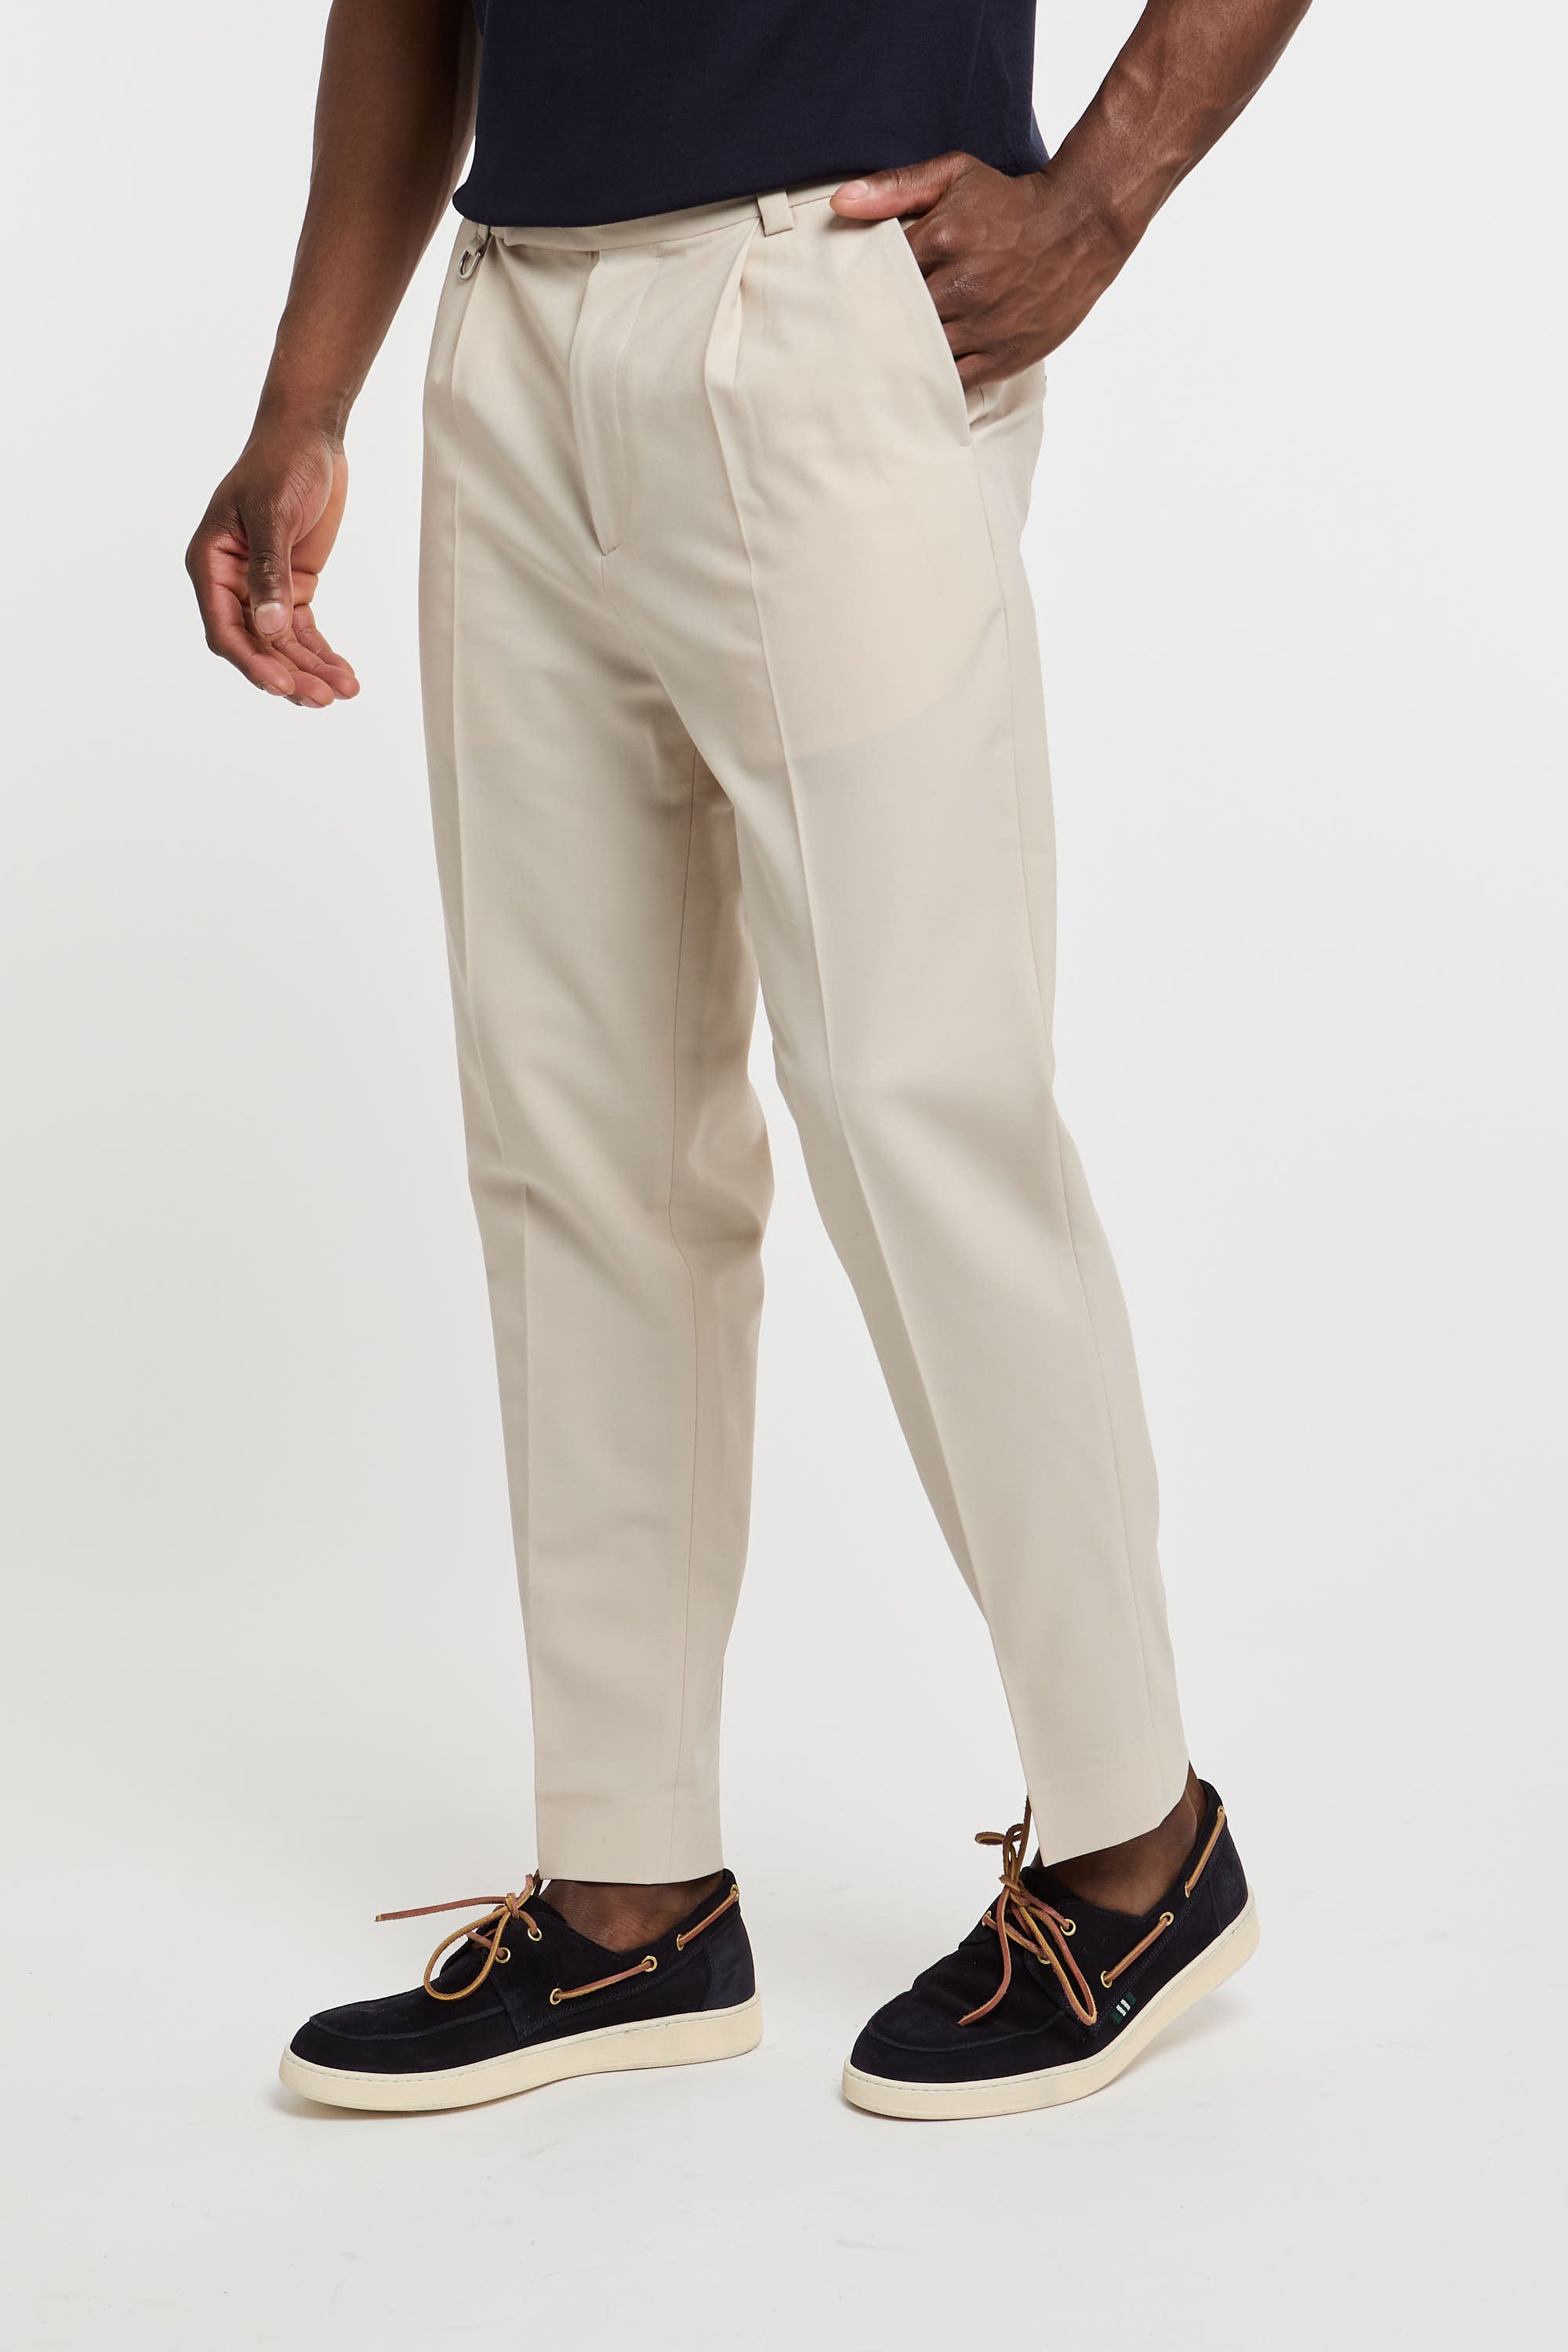 Paolo Pecora Beige Wool/Polyester Mix Trousers-5